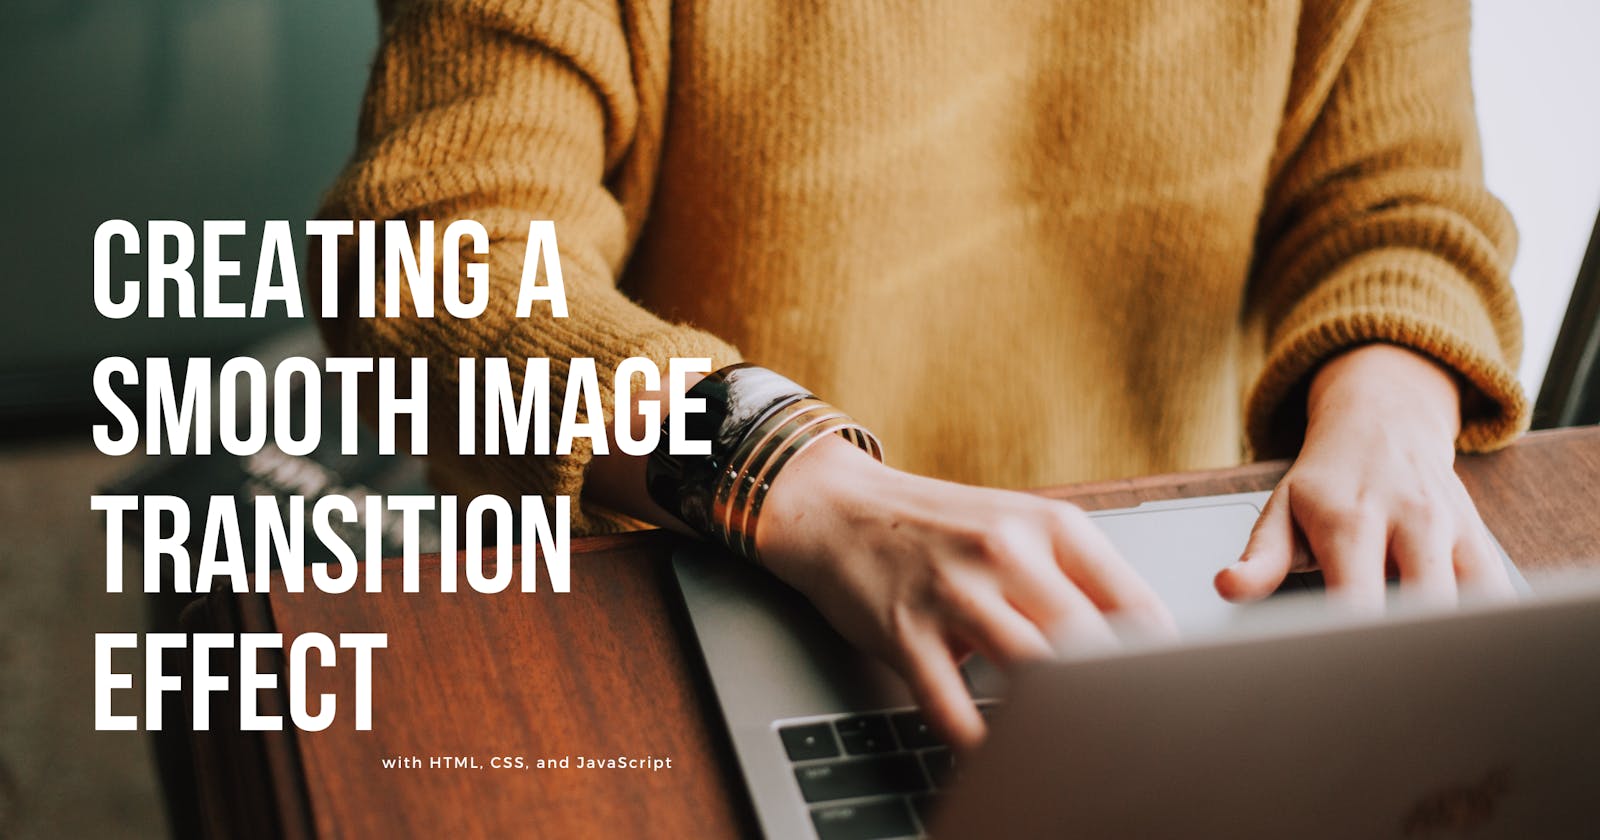 Creating a Smooth Image Transition Effect with HTML, CSS, and JavaScript